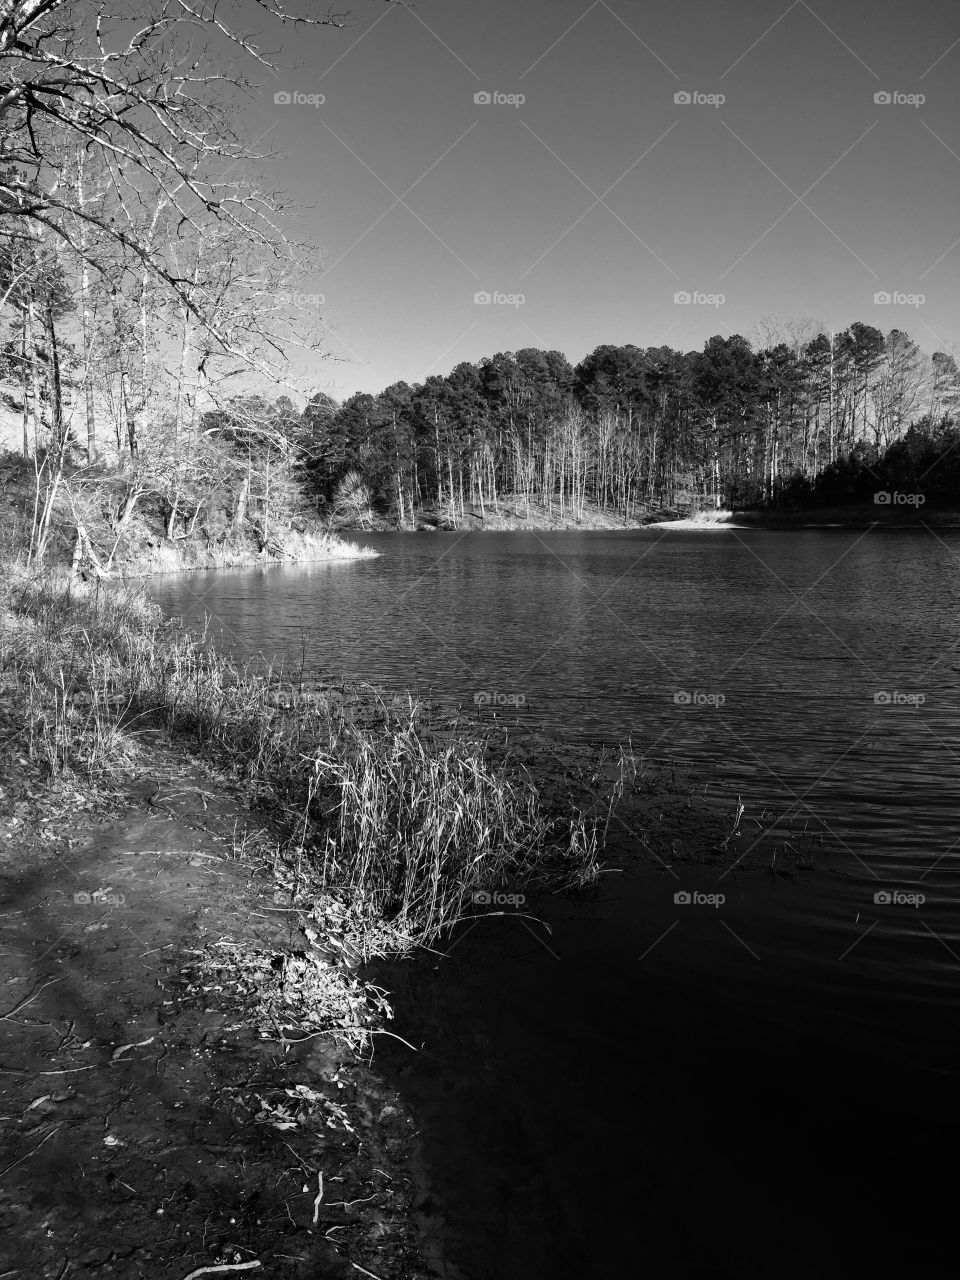 A beautiful black and white view of the lake!